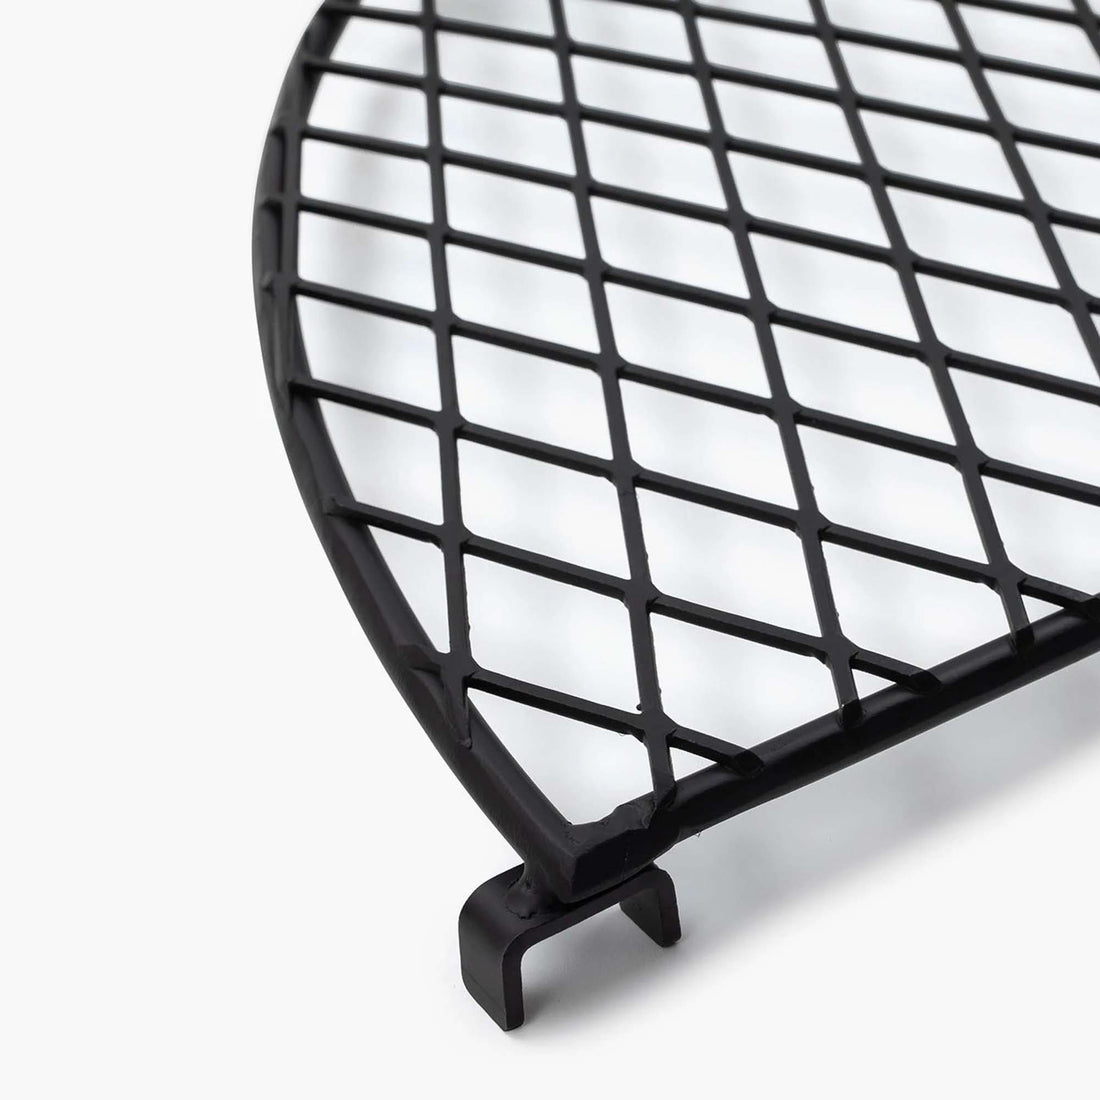 COWBOY FIRE PIT GRILL GRATE - 23"